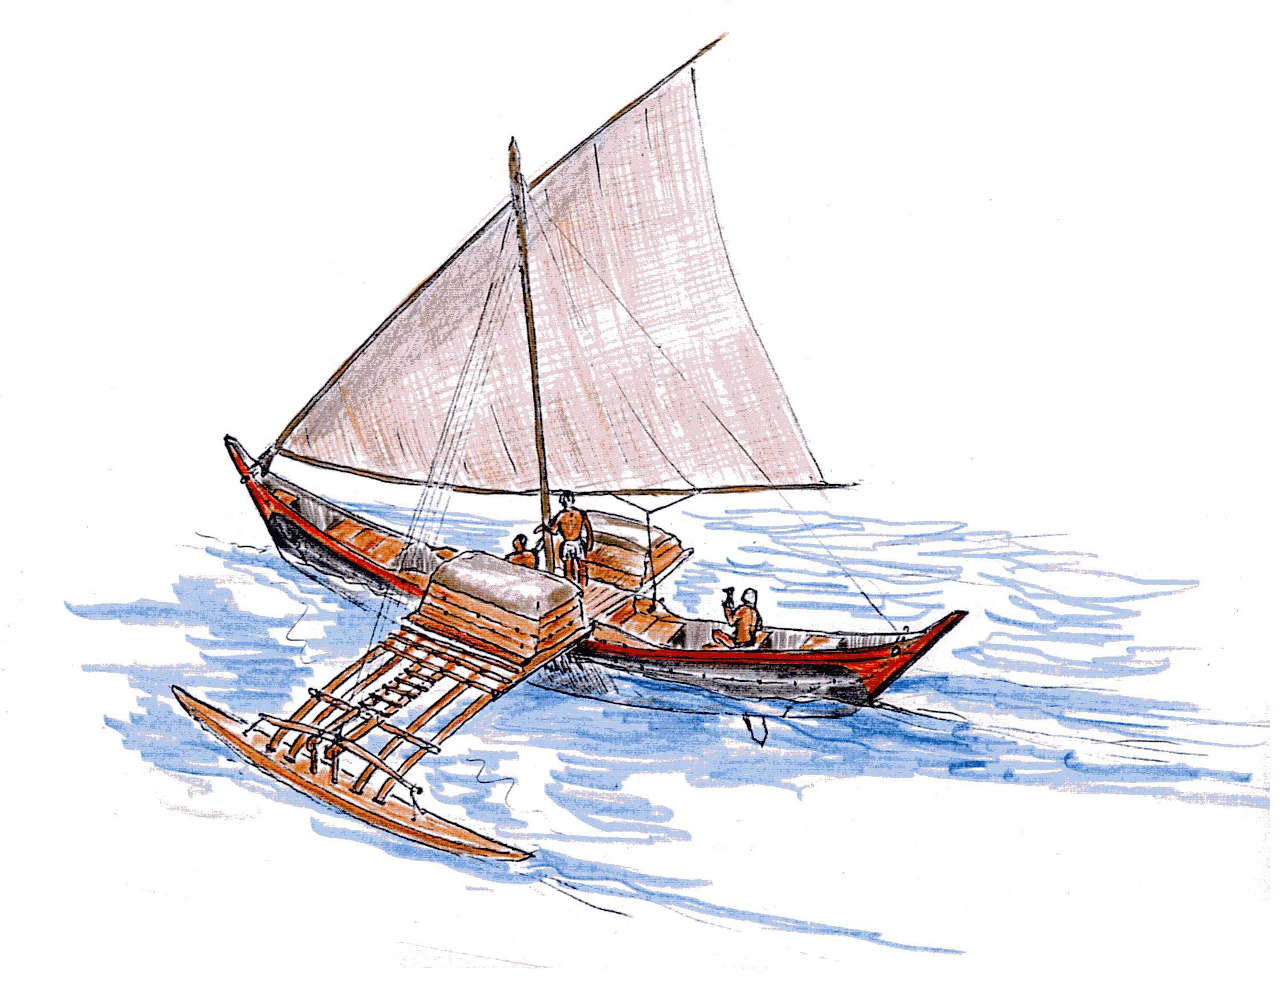 Drawing of an outrigger canoe proa